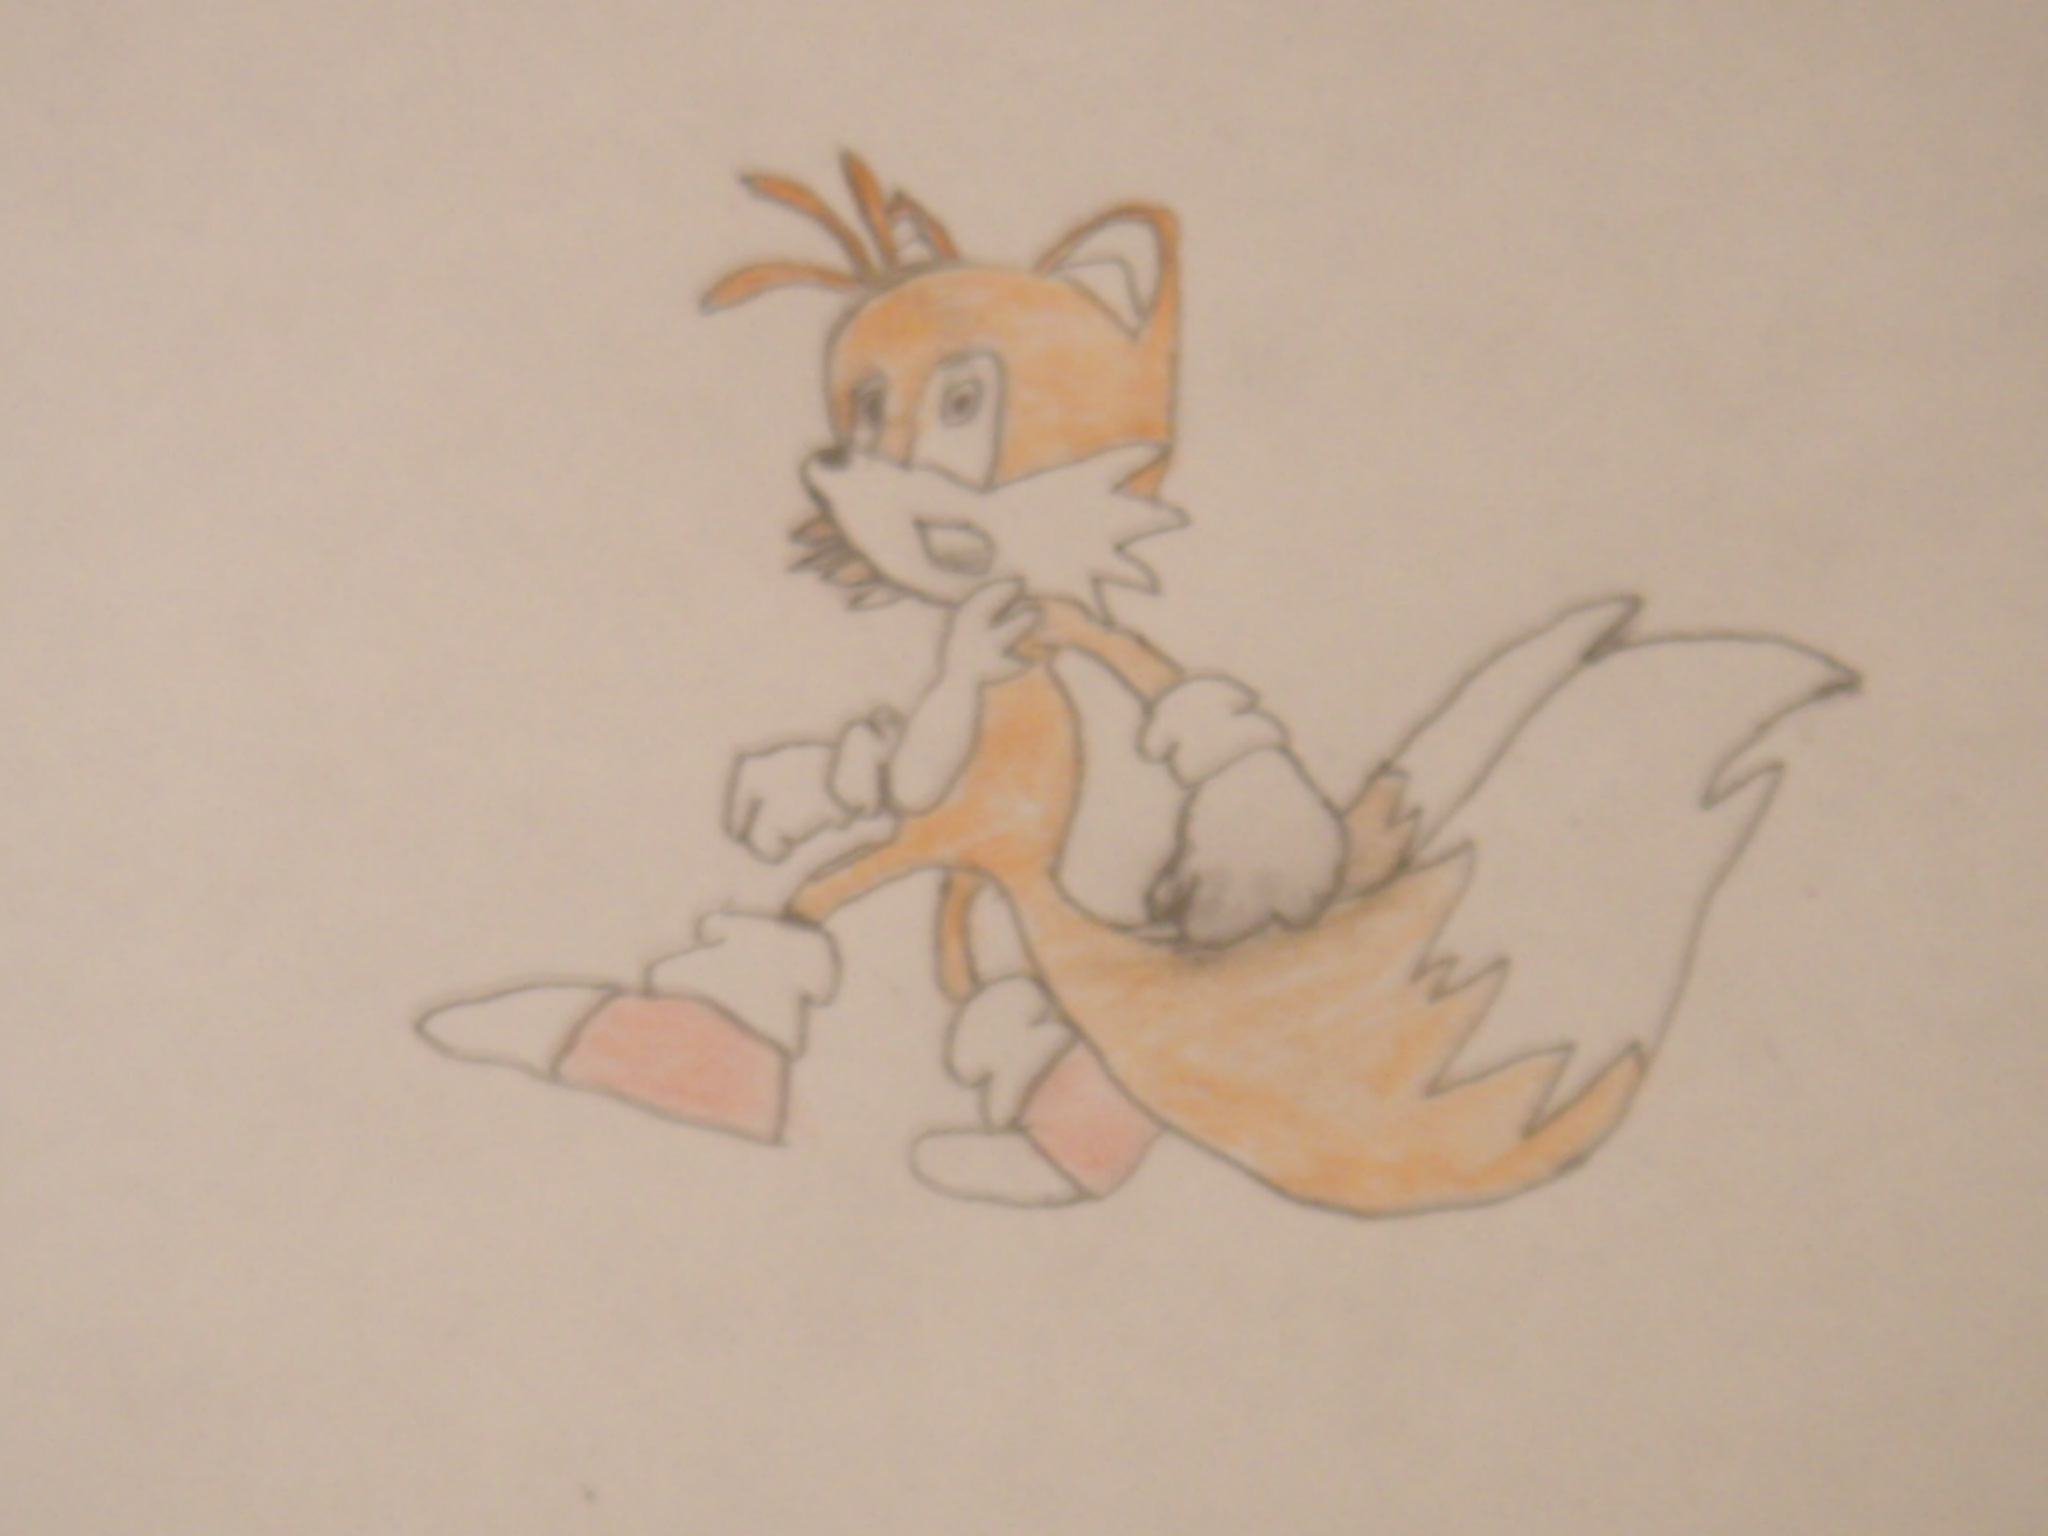 Tails Practice by MilesTailsPrower3